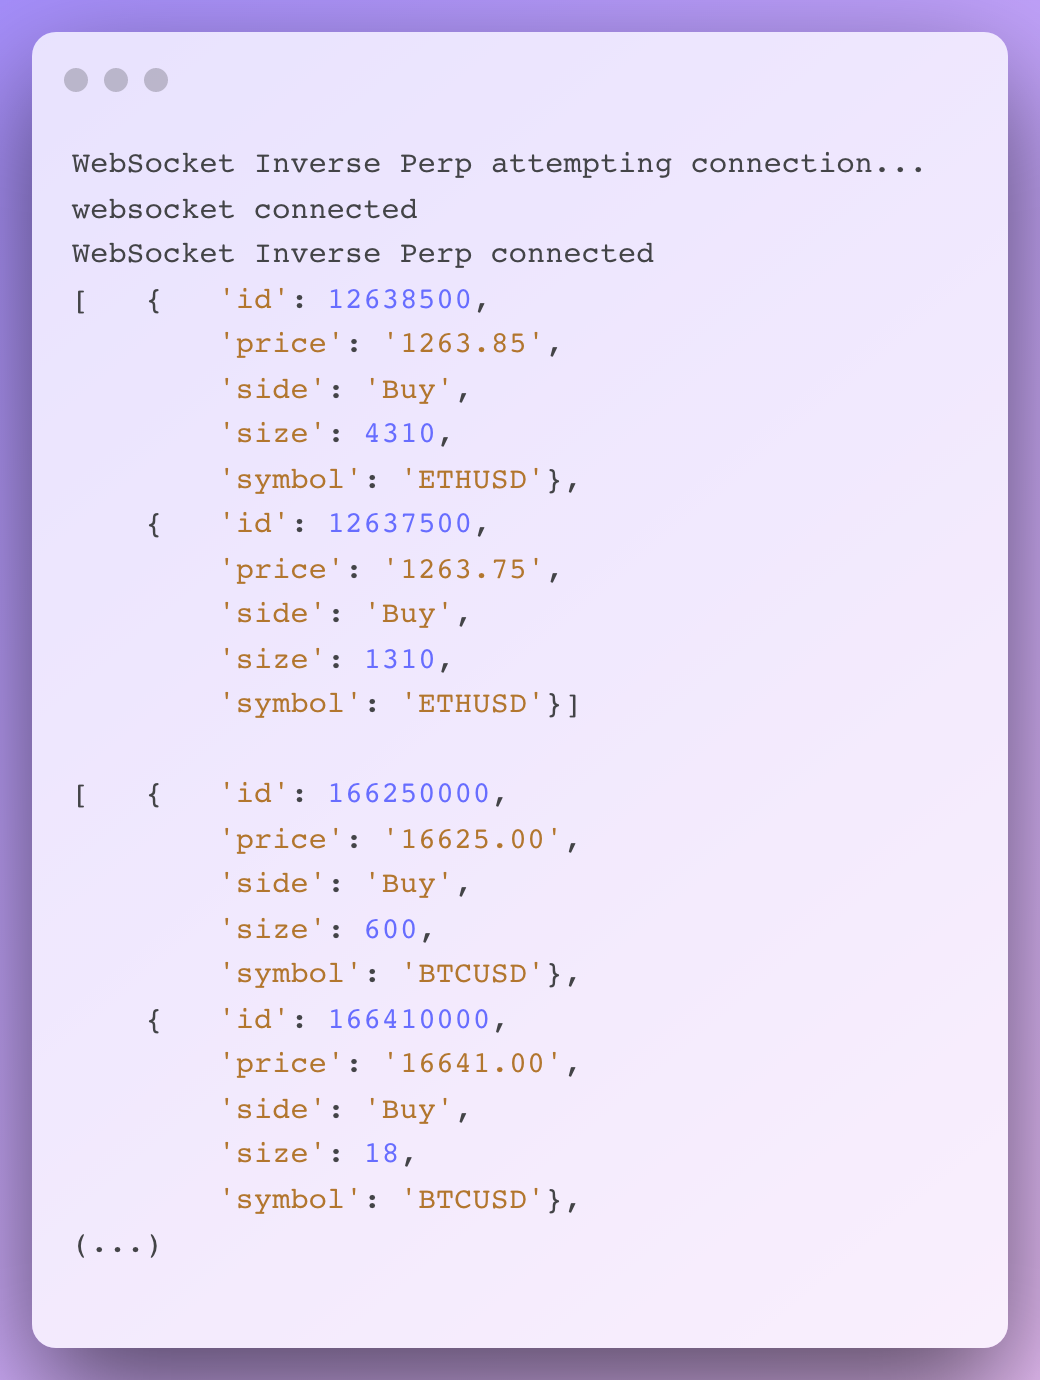 websockets connection for inverse